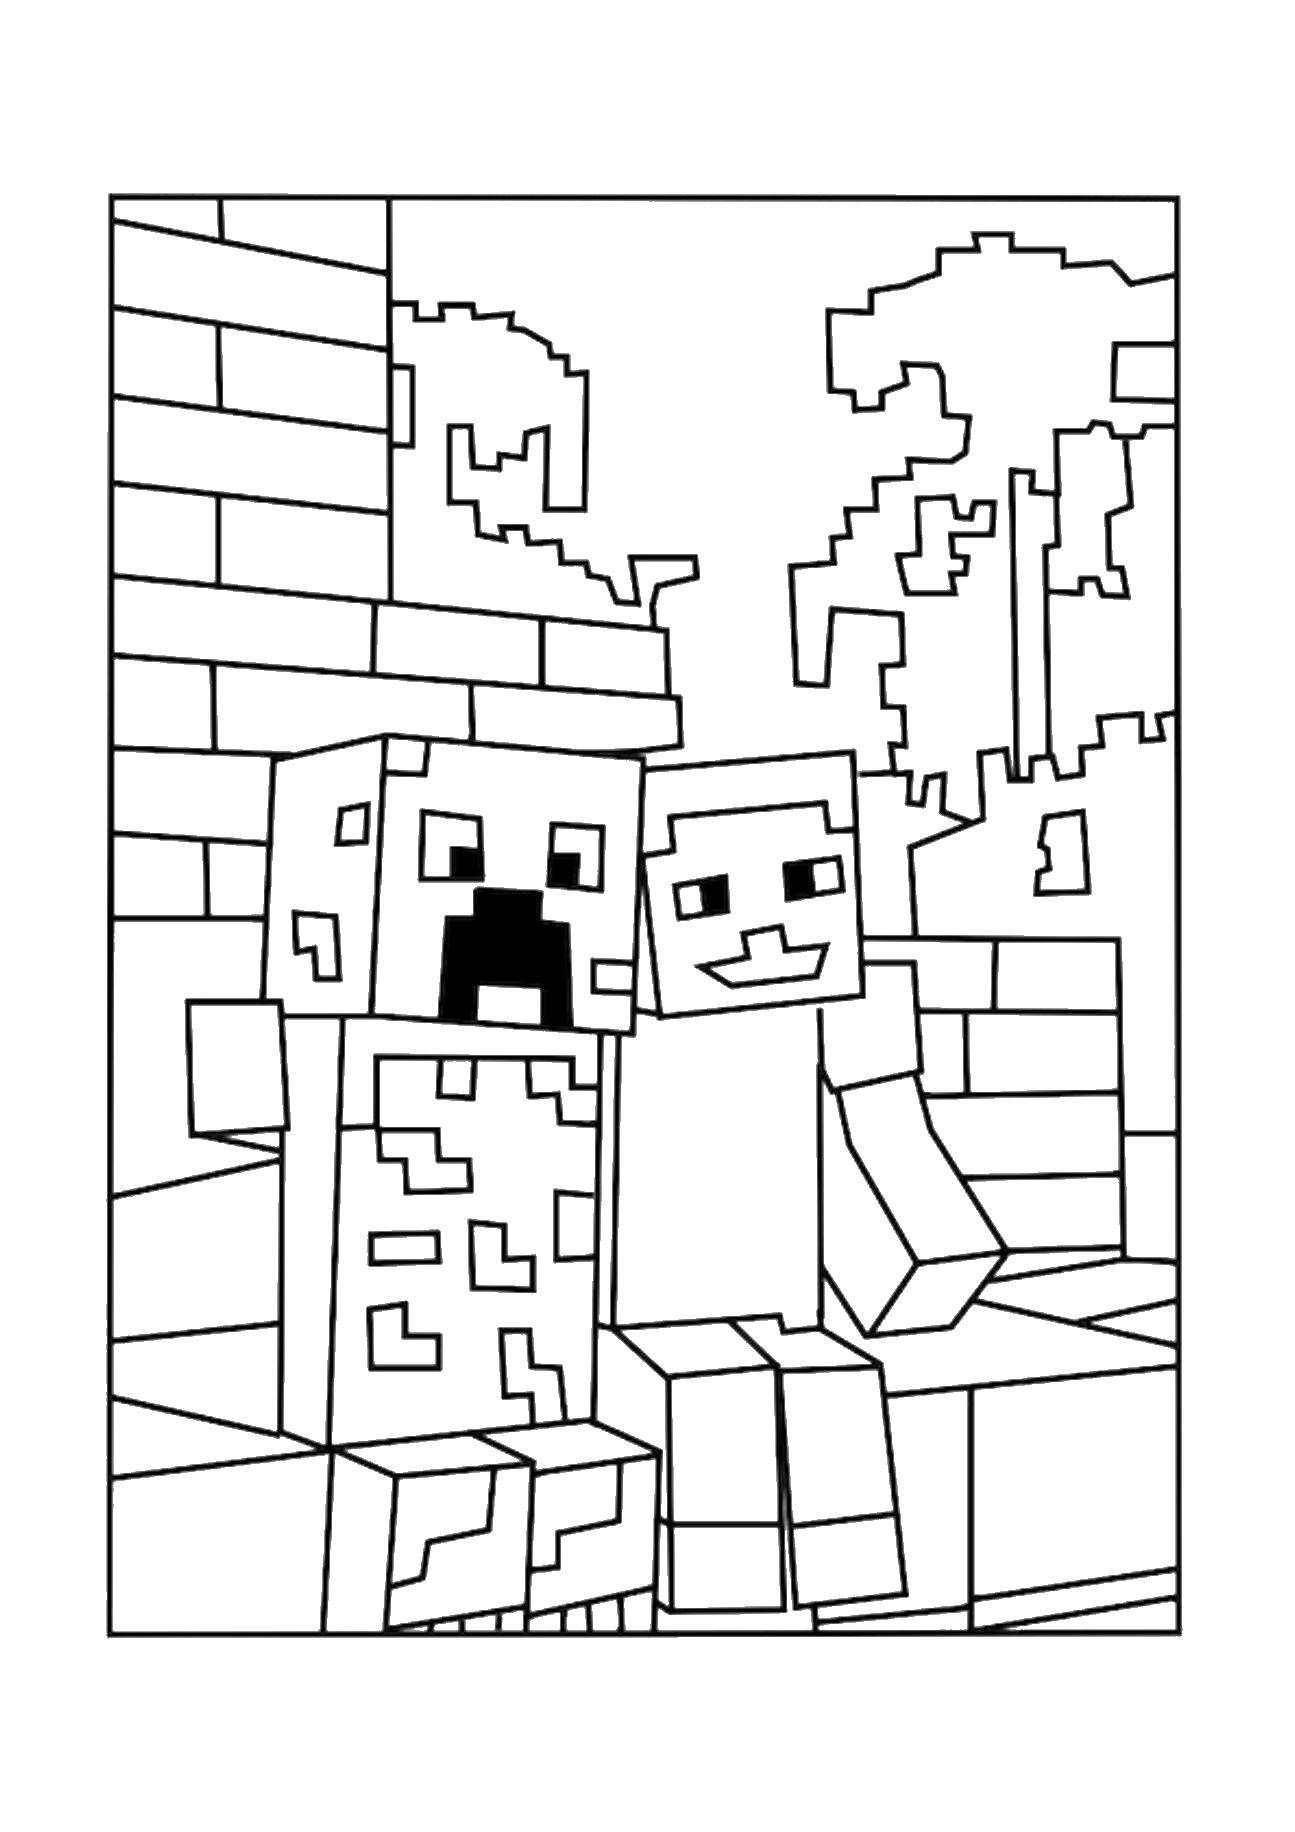 Coloring Minecraft people. Category minecraft. Tags:  minecraft.